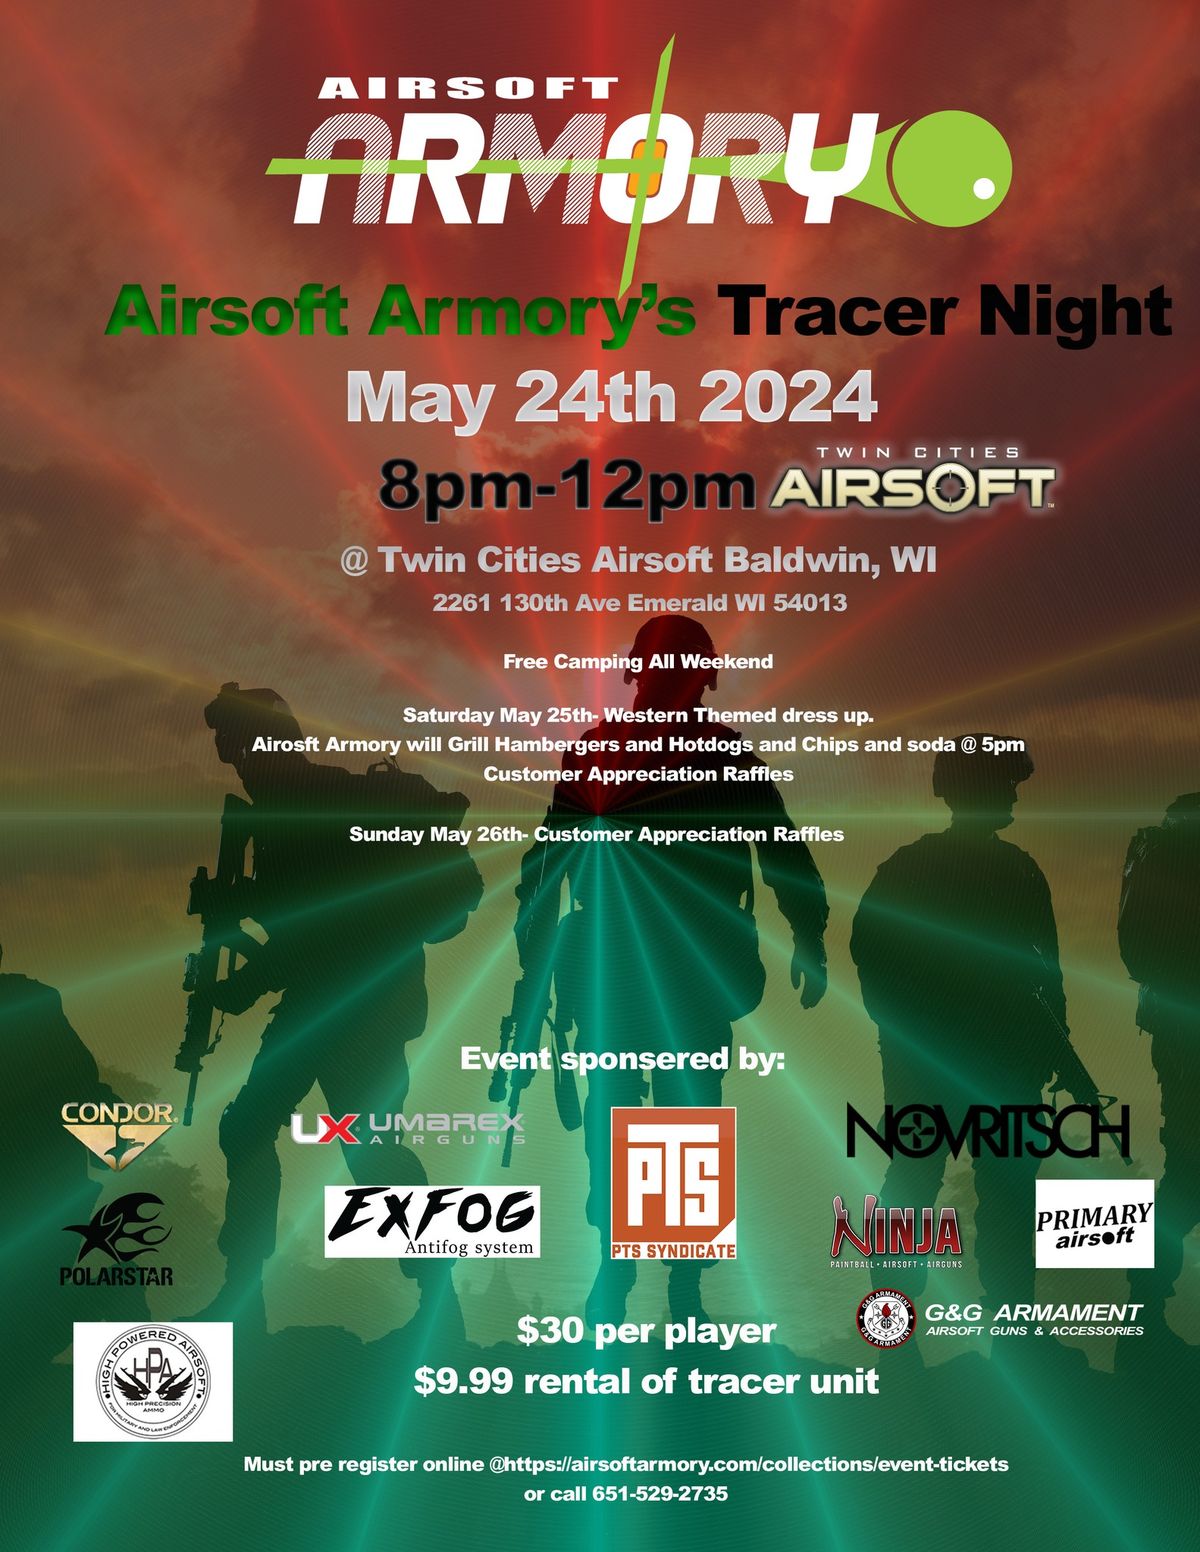 TRACER NIGHT - AIRSOFT ARMORY